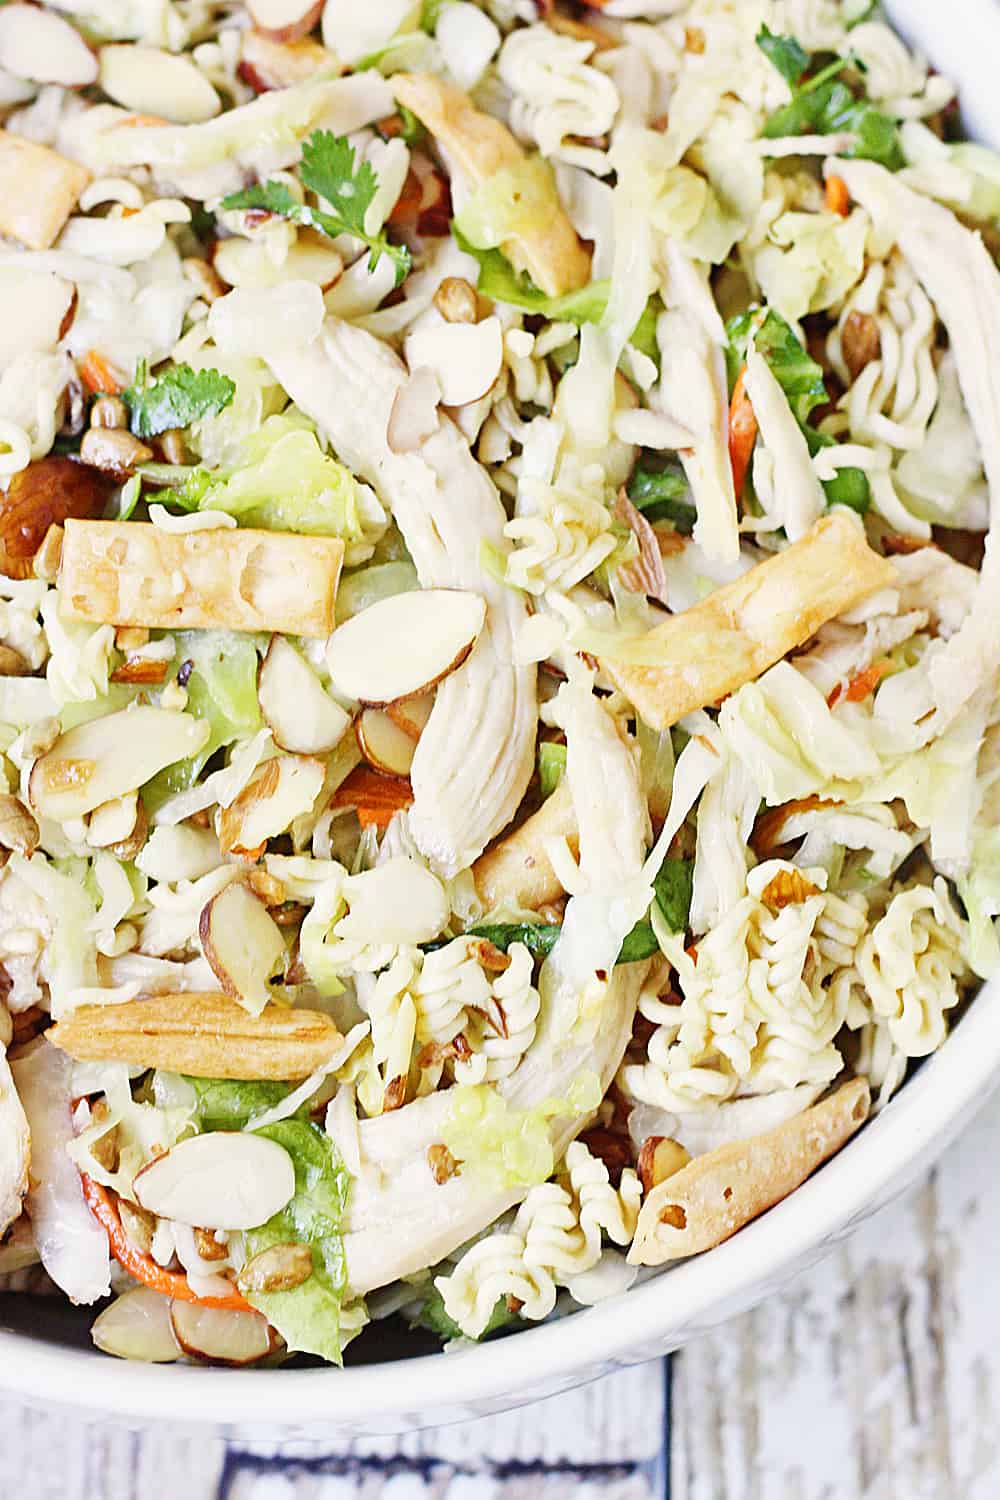 Easy Asian Ramen Salad -- My family LOVES this Asian ramen salad! An Asian salad kit + rotisserie chicken + a few simple ingredients equals the easiest Asian ramen noodle salad ever!